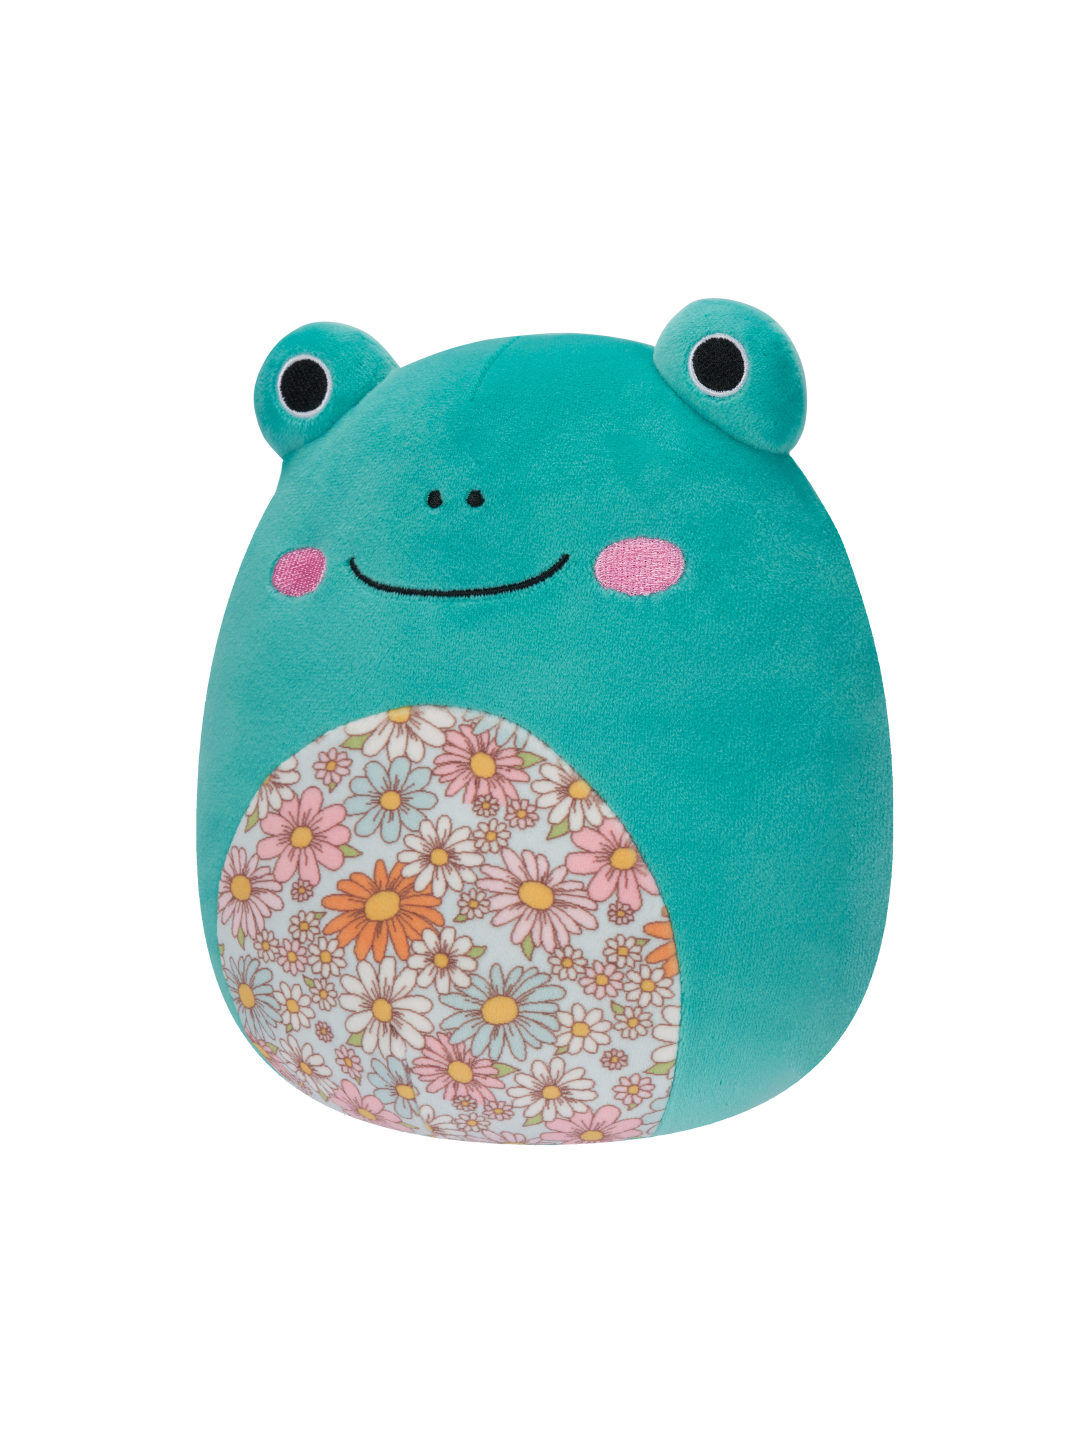 Squishmallows Robert the Aqua Frog with  Floral Belly, 20 cm